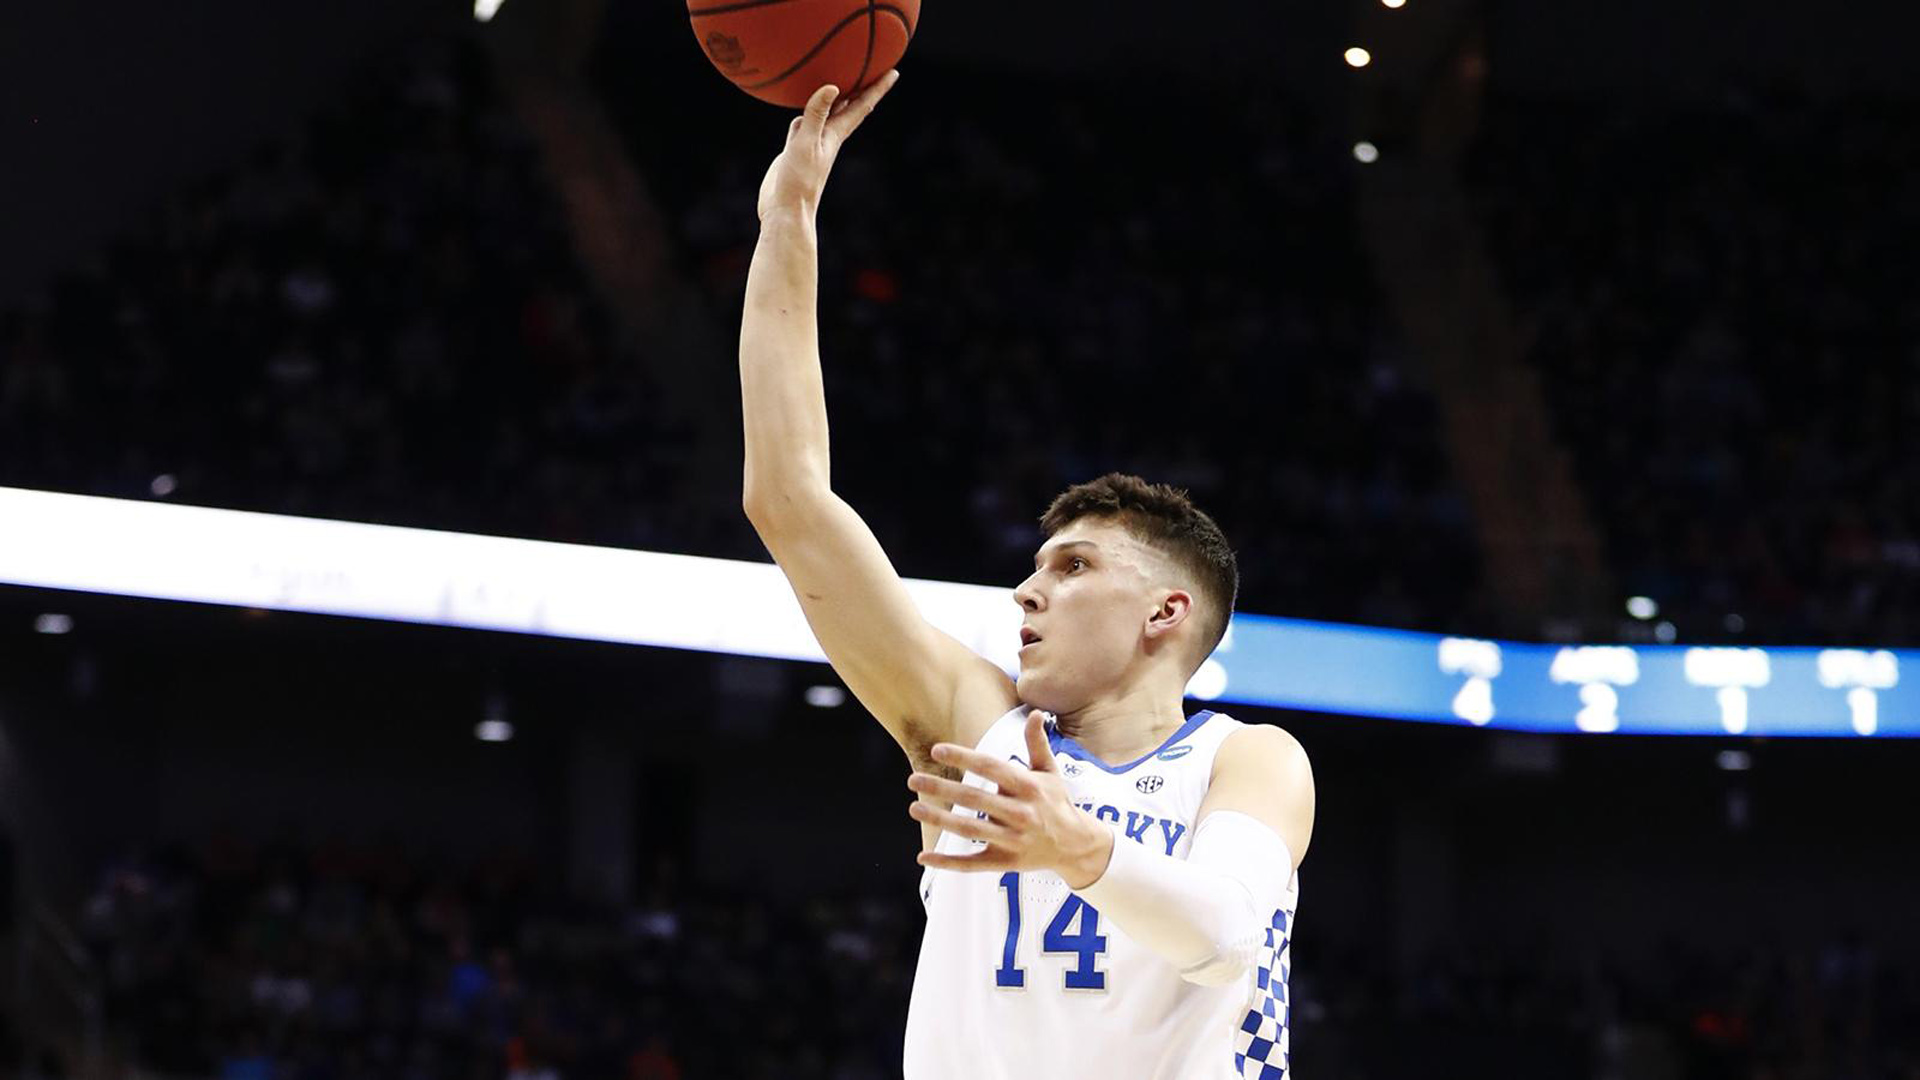 Tyler Herro Is Trying To Throw A Ball To Basket Wearing White Dress Basketball HD